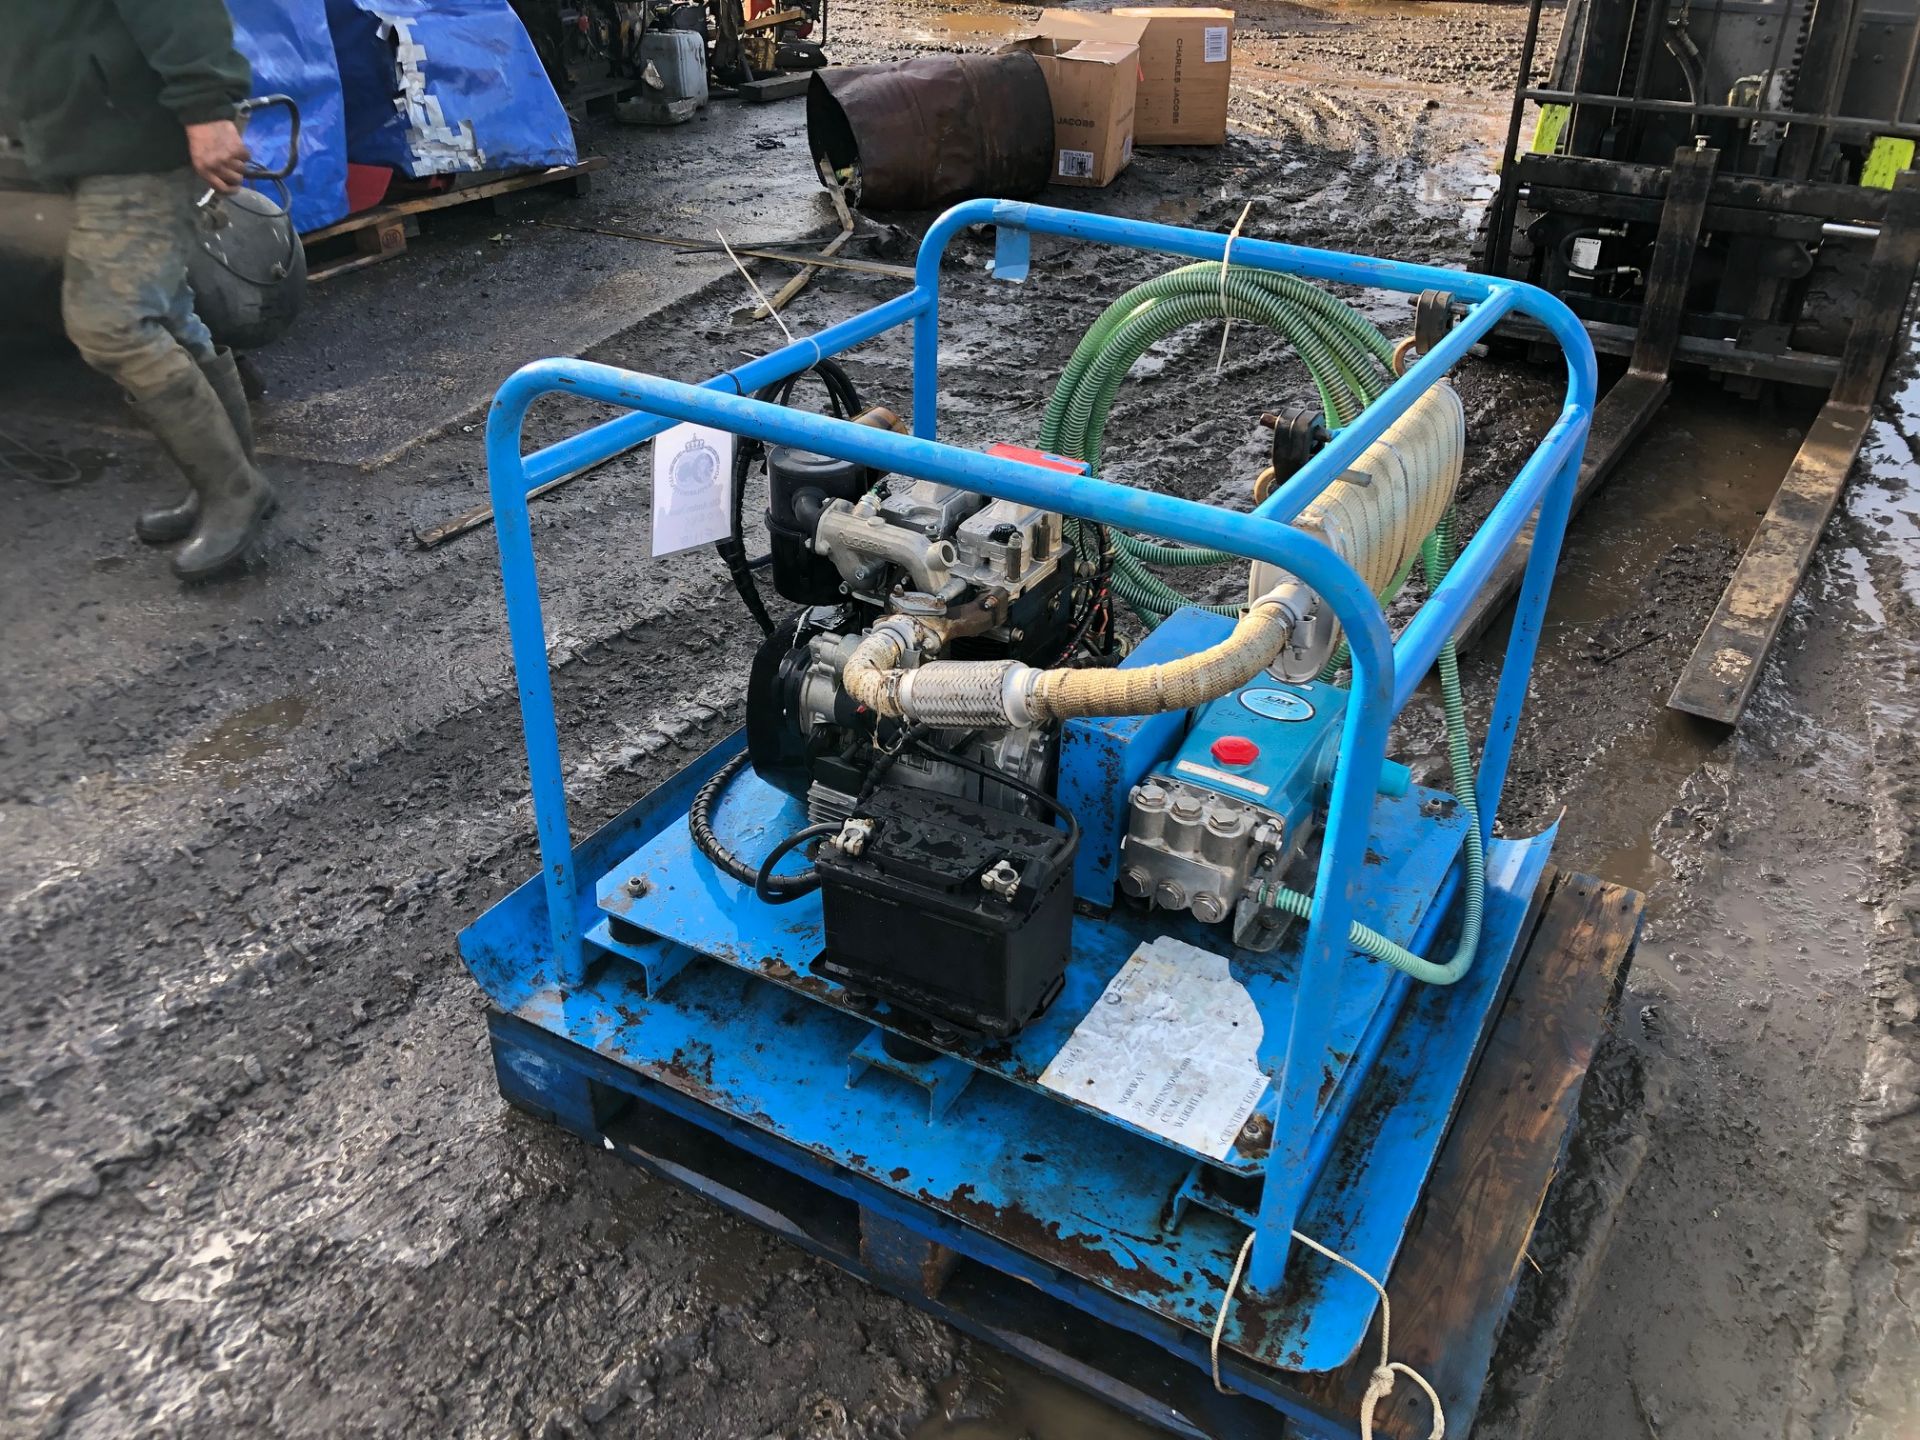 RUGGERINI 2 CYLINDER ELECTRIC START DIESEL JET WASH, CAT1051 PUMP (2200 PSI, 10GPM) VERY LITTLE USE - Image 4 of 6